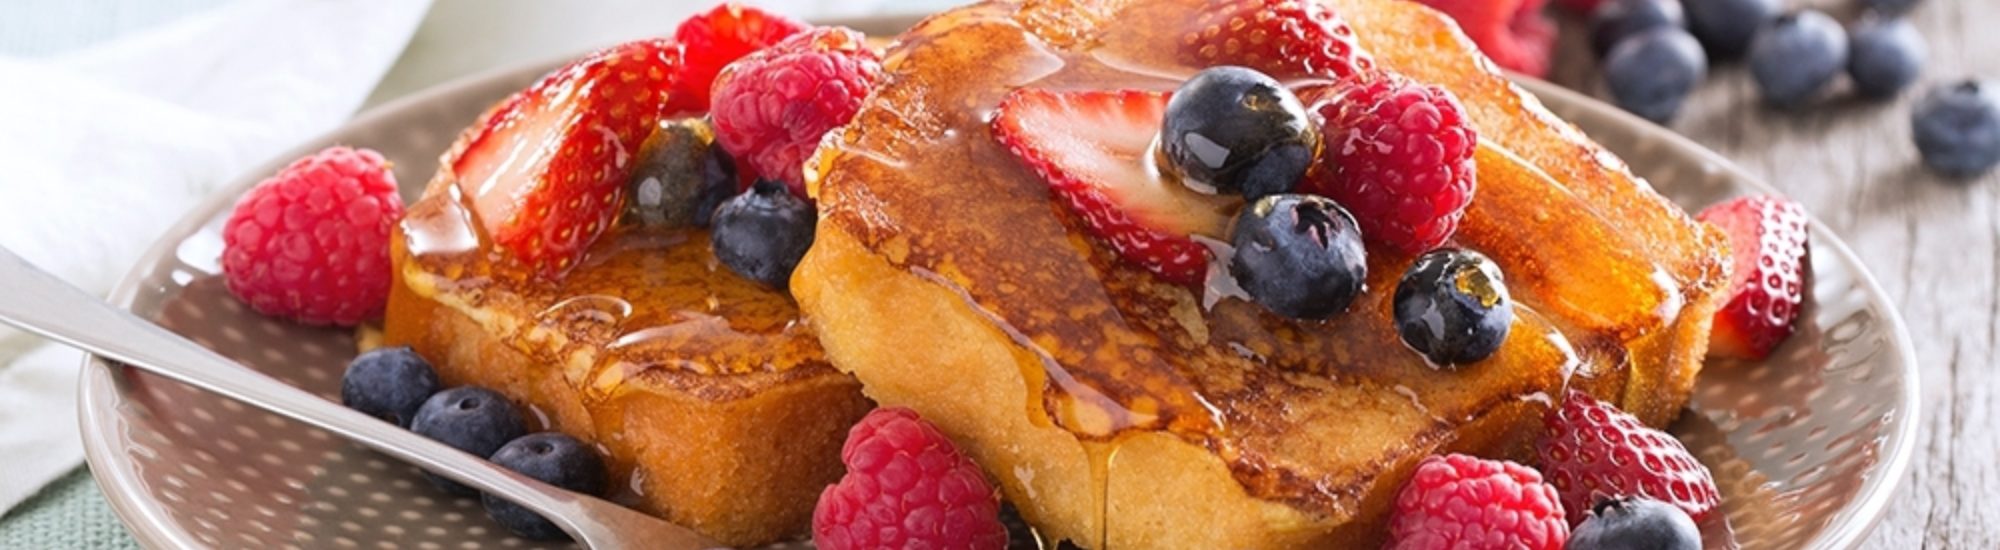 Honey Leches French Toast Banner Image2